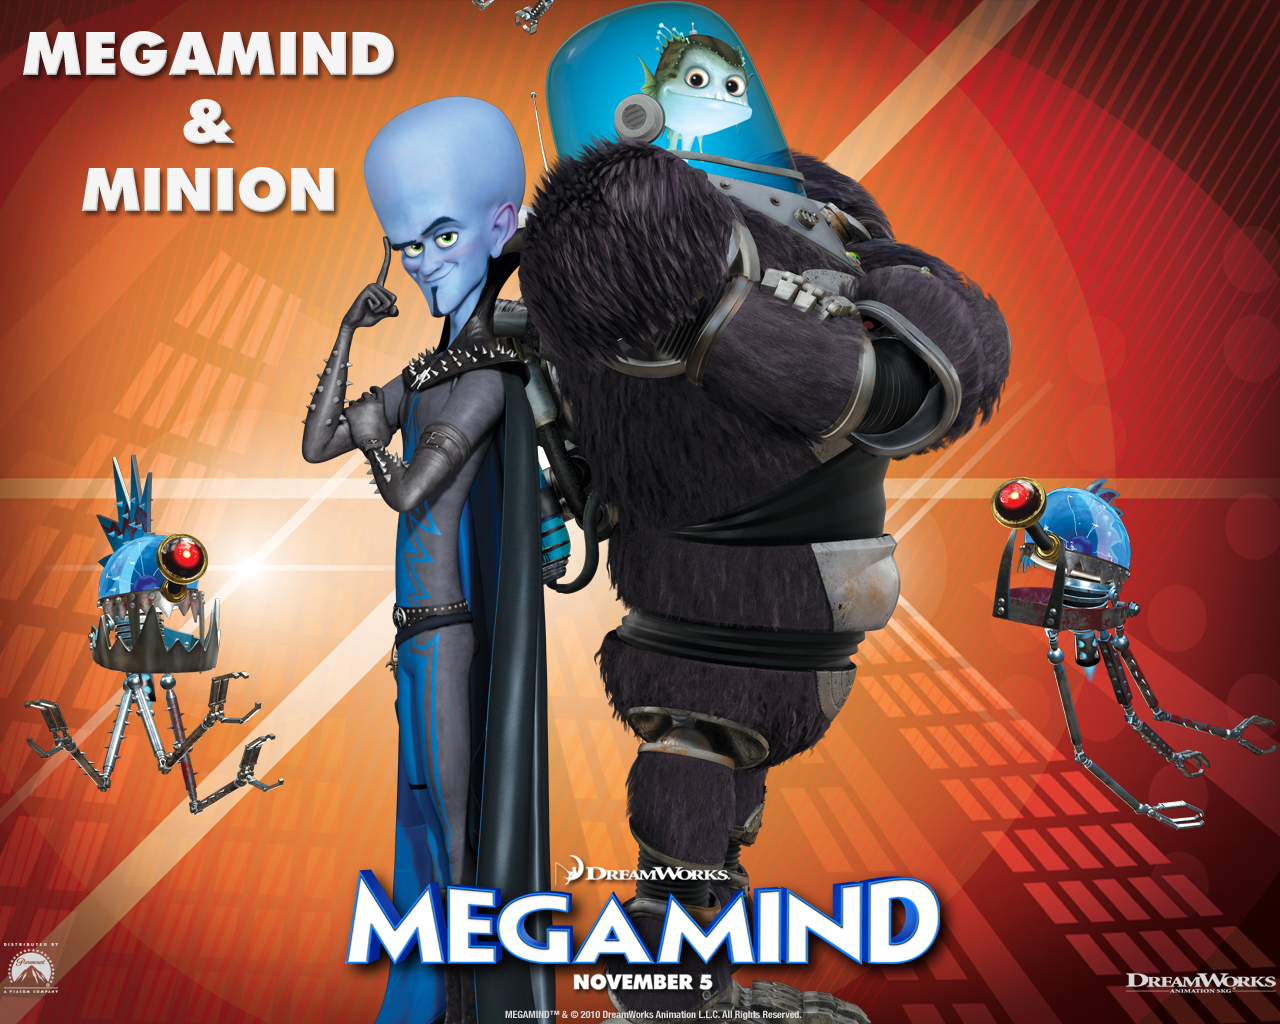 Minion And Megamind From The Dreamworks Cg Animated - Megamind And Minion - HD Wallpaper 